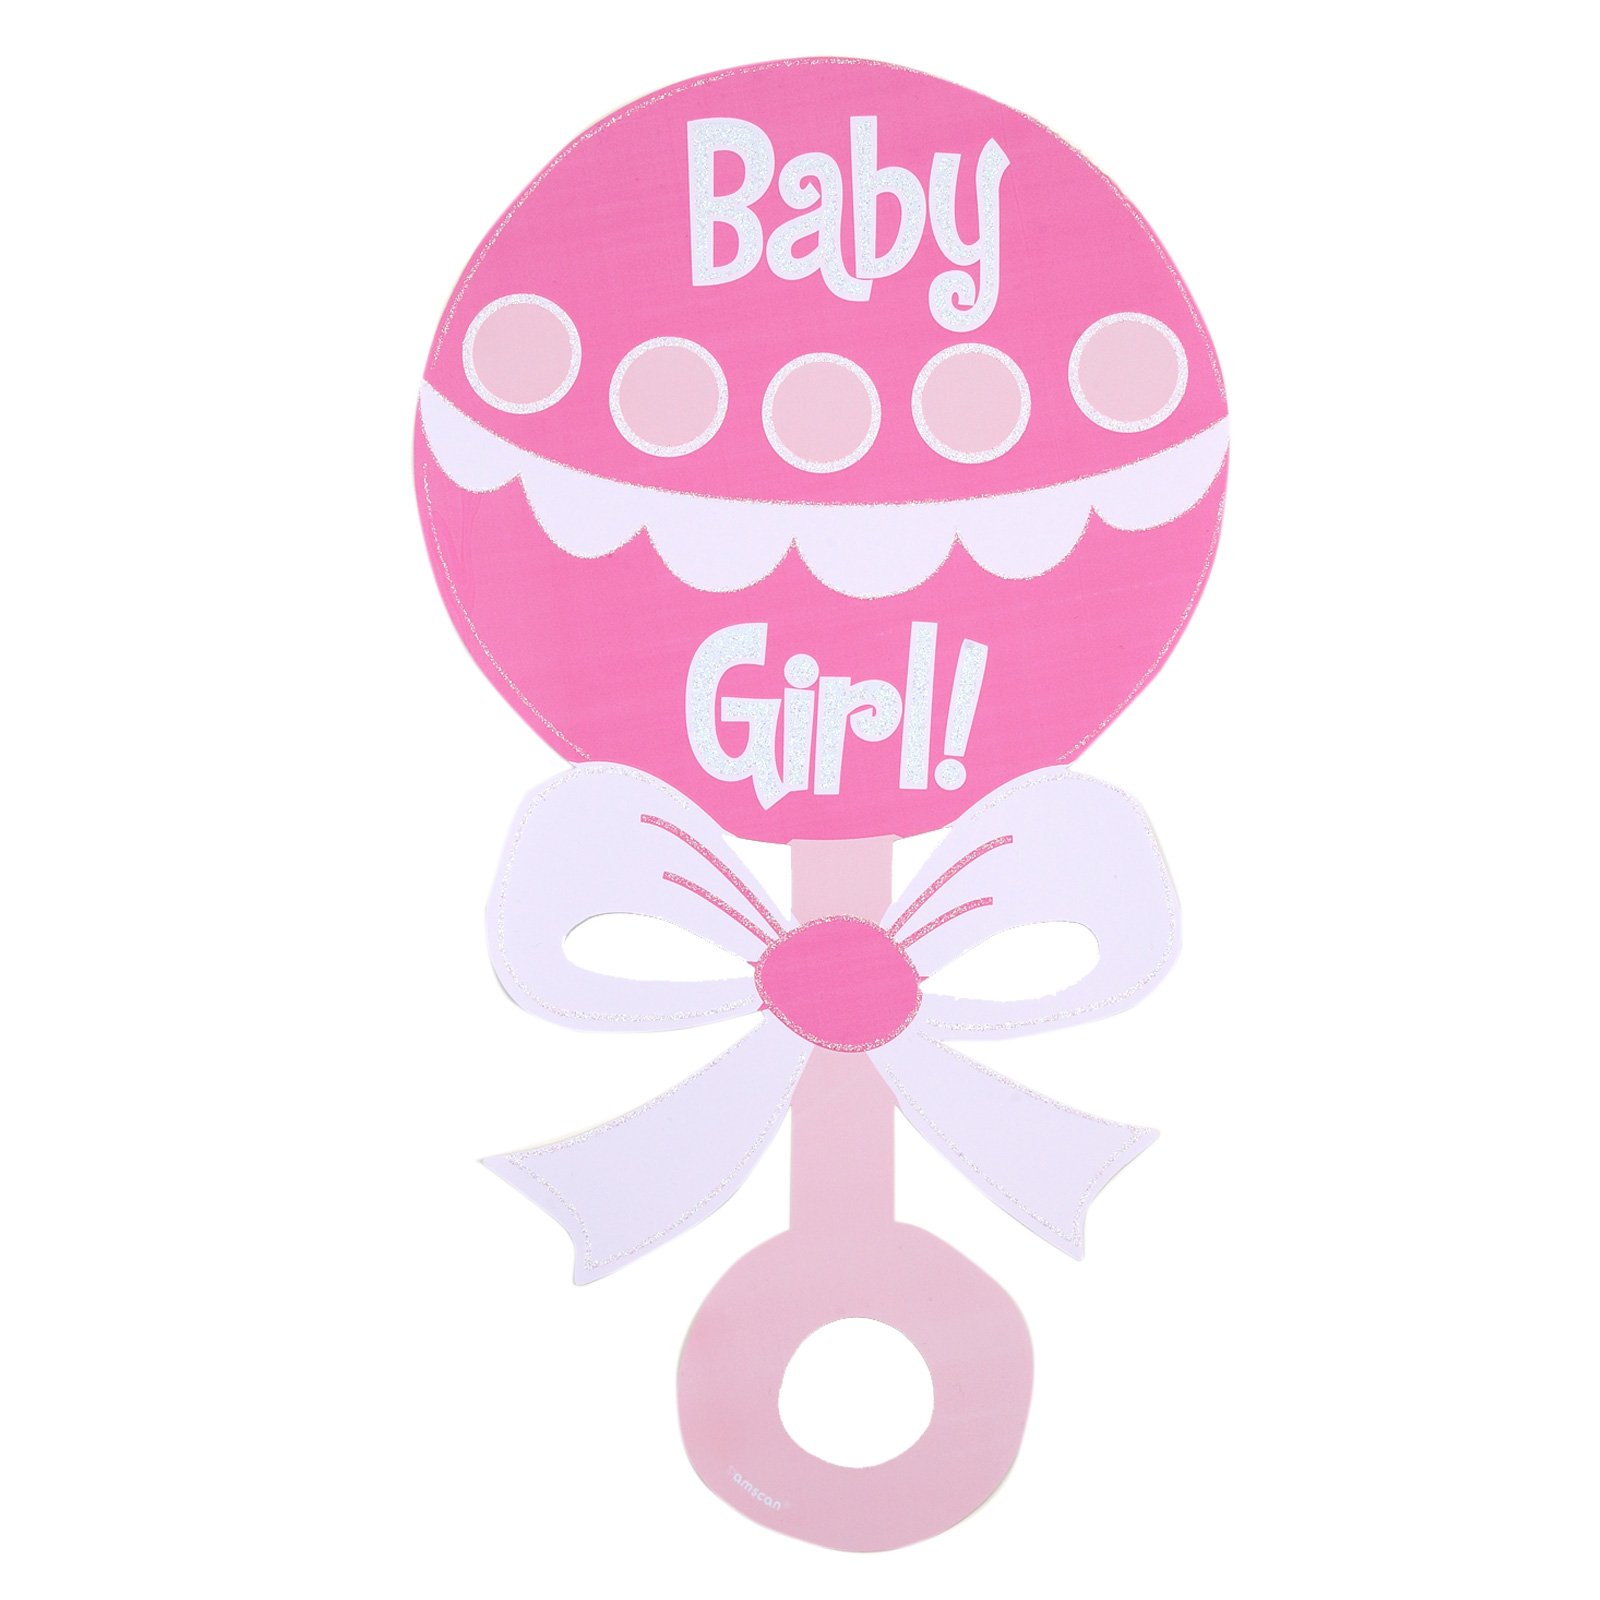 baby girl rattle clipart - all the Gallery you need!